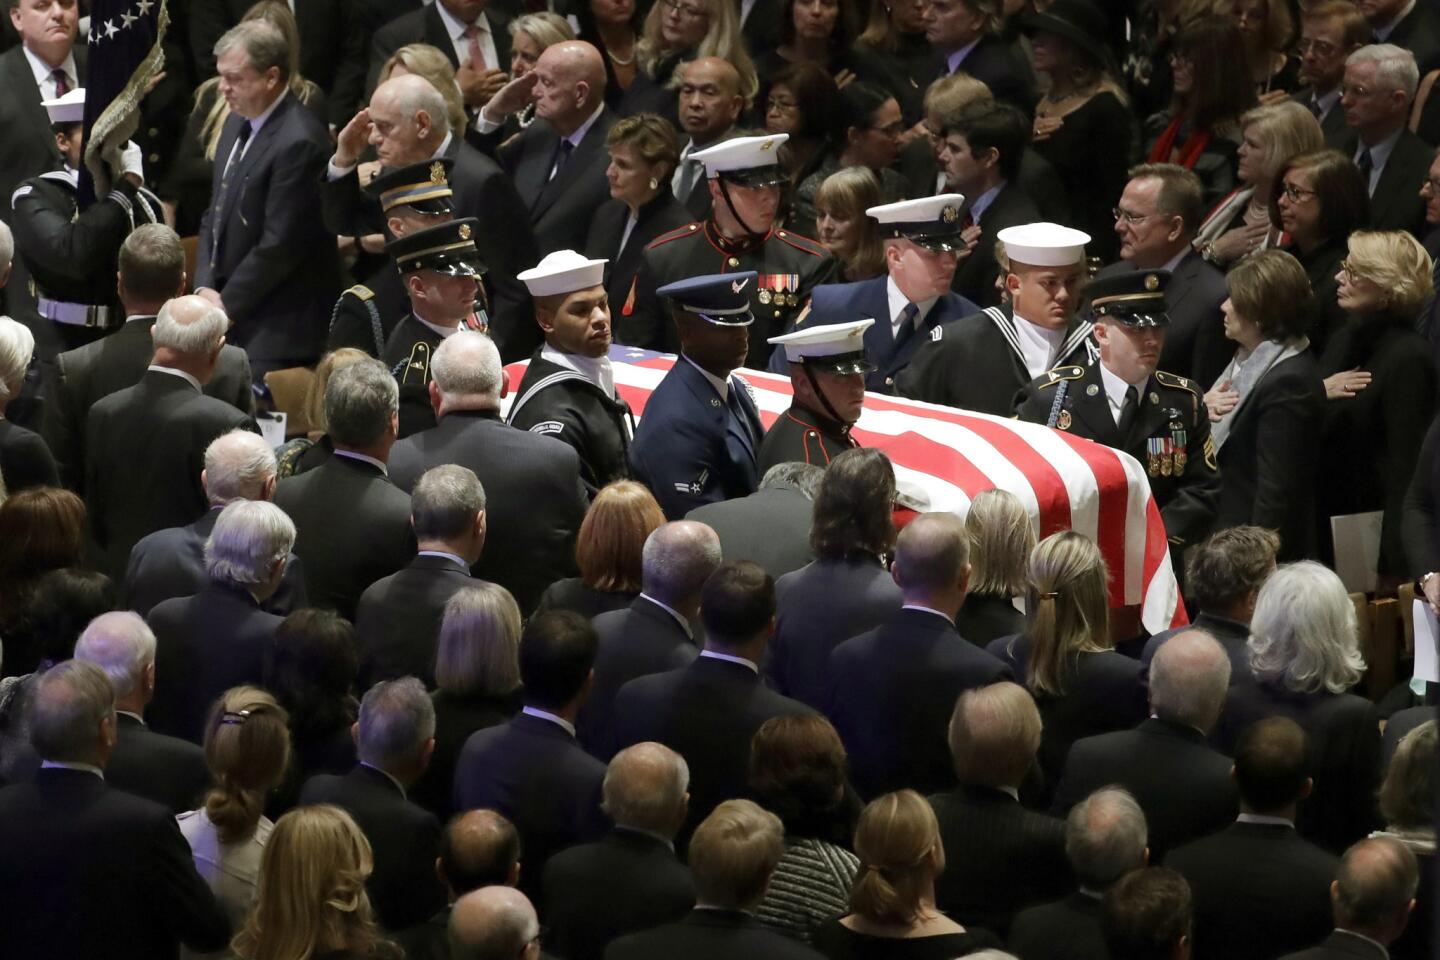 Funeral for President George H. W. Bush